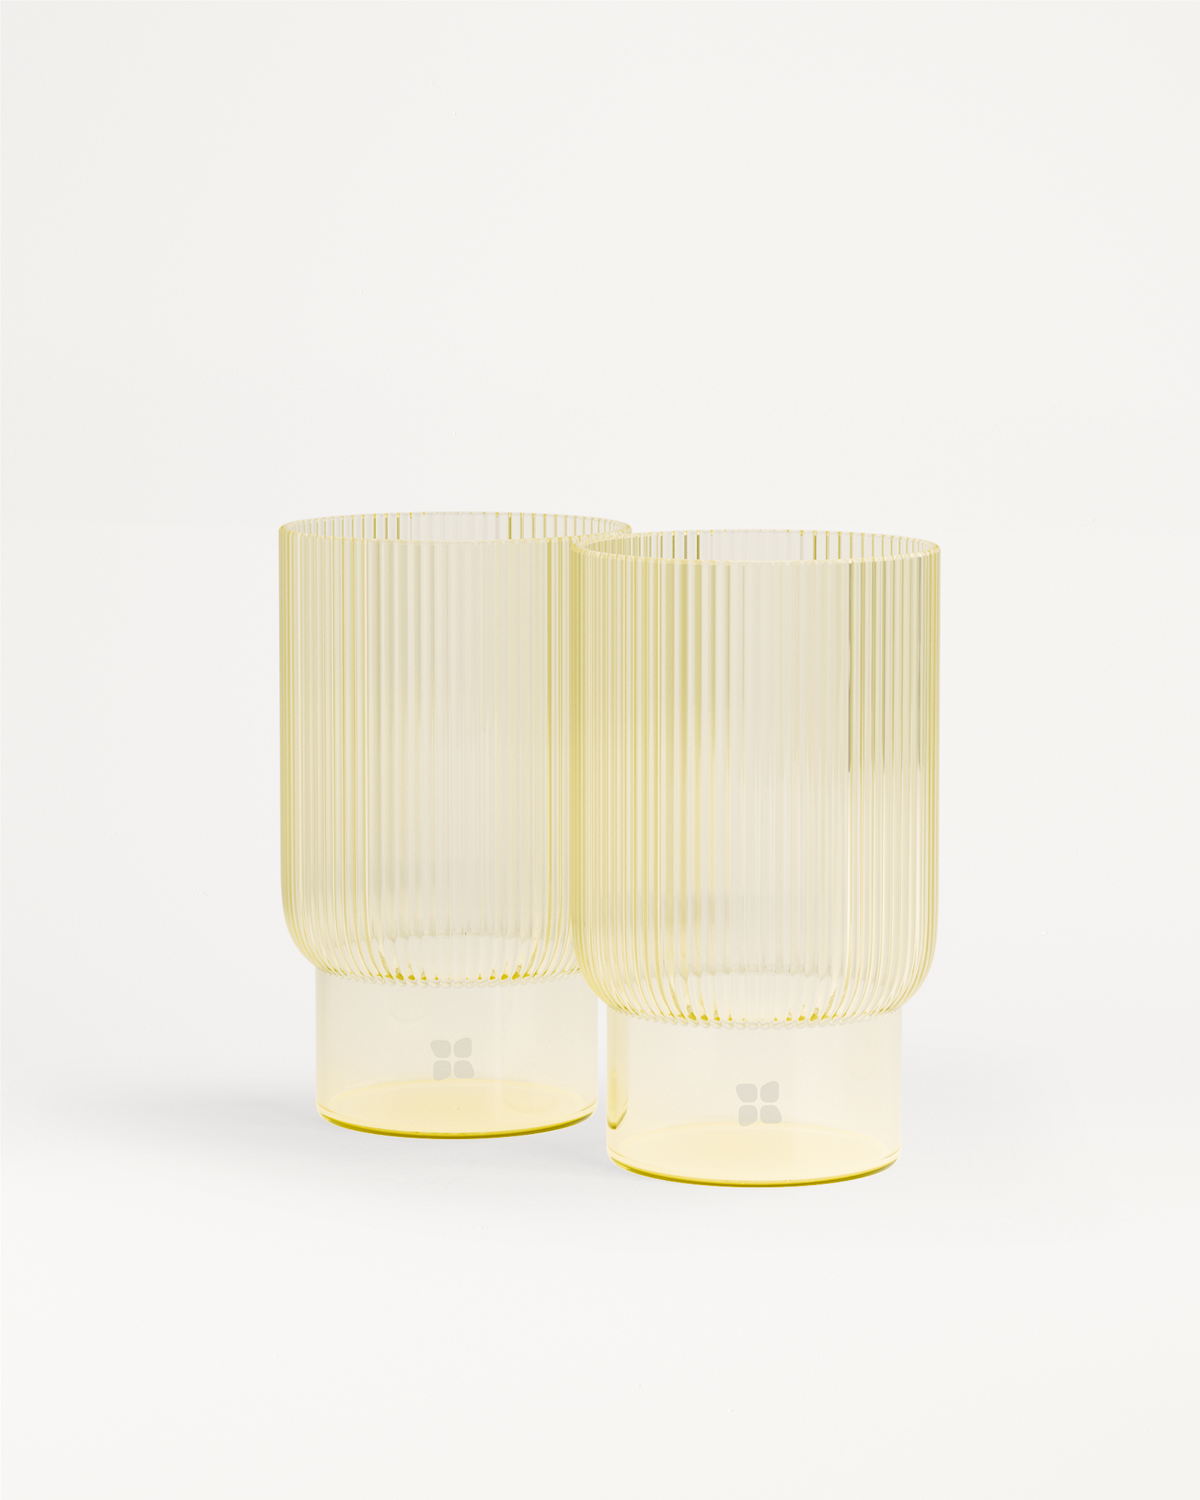 Limited Edition Fluted Glasses: Order now | waterdrop®